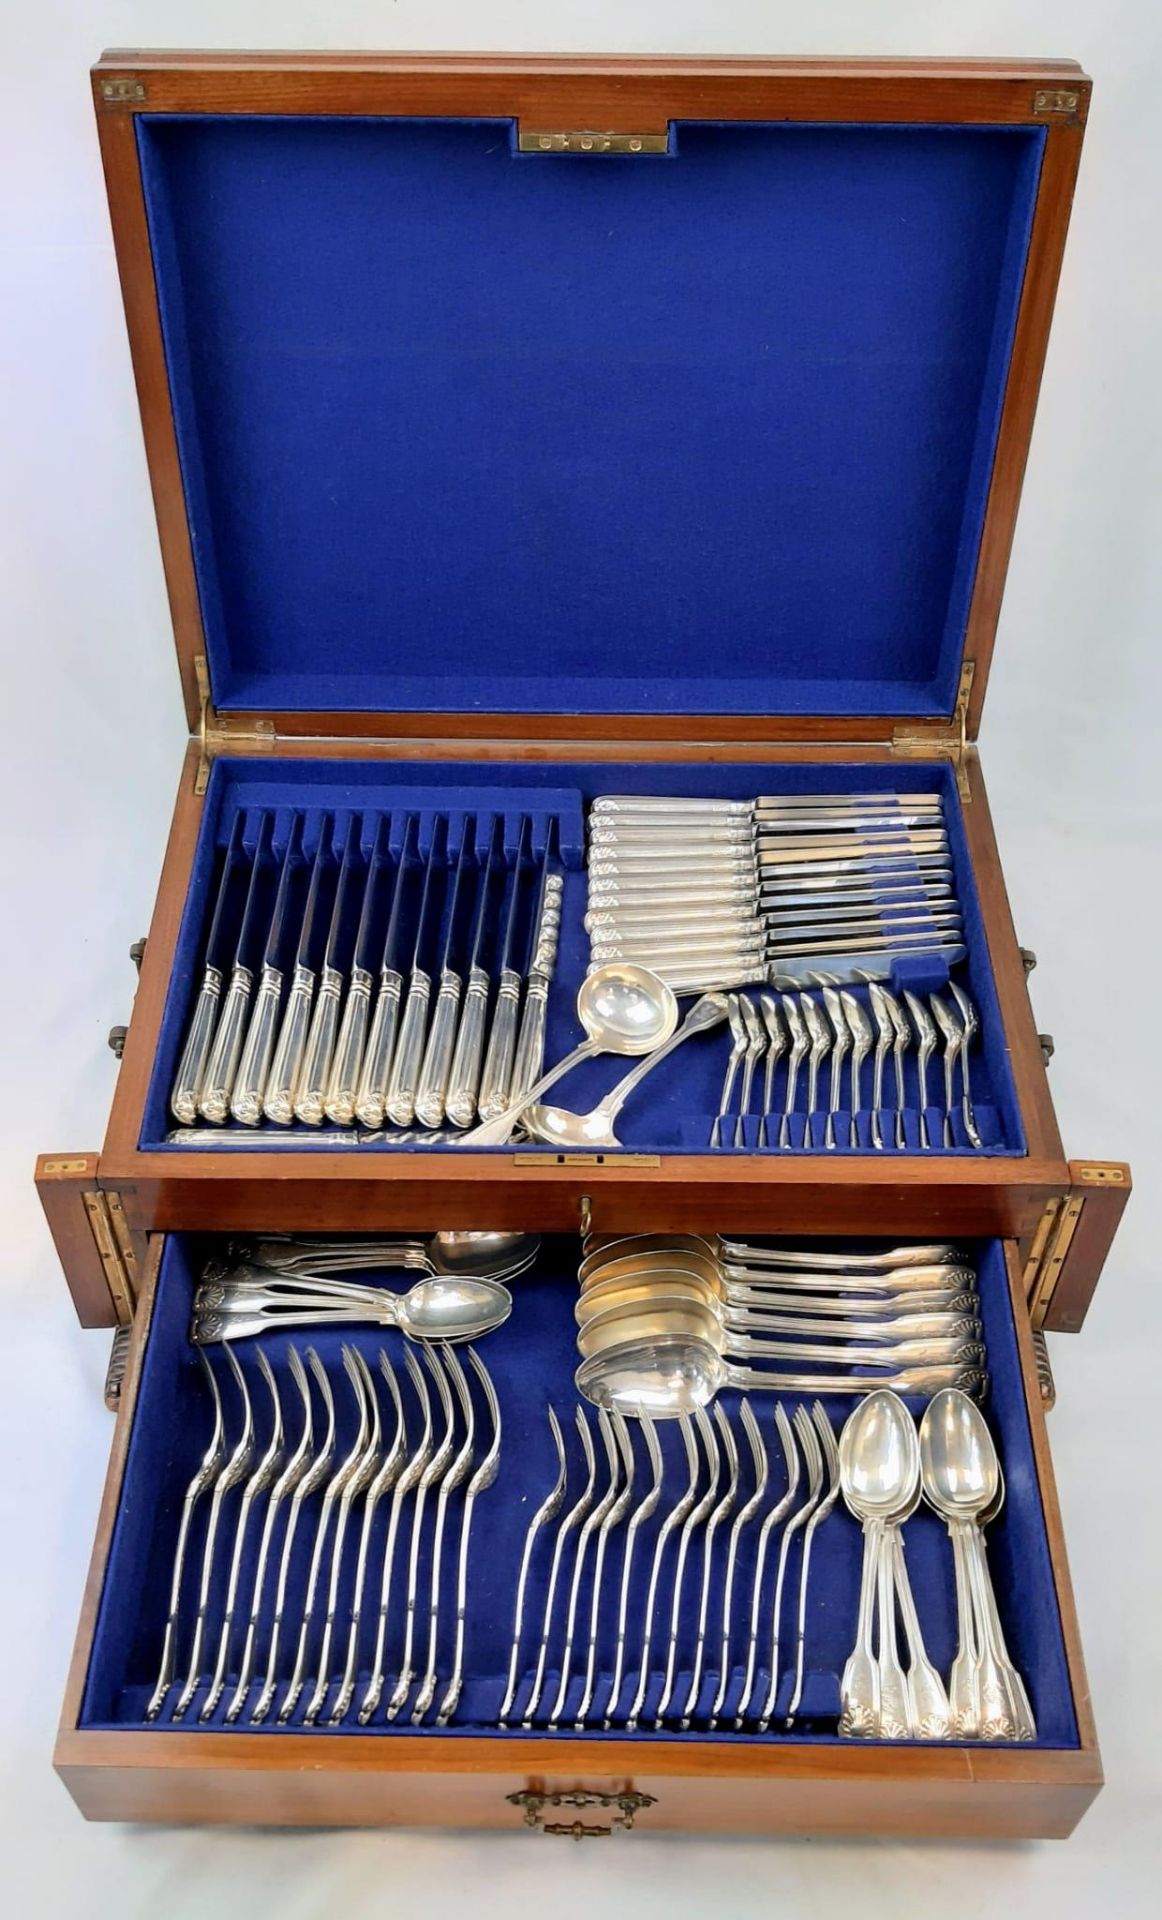 A Silver-Handled Cutlery Set Presented in a Victorian Display Box. To include: 25 knives, 24